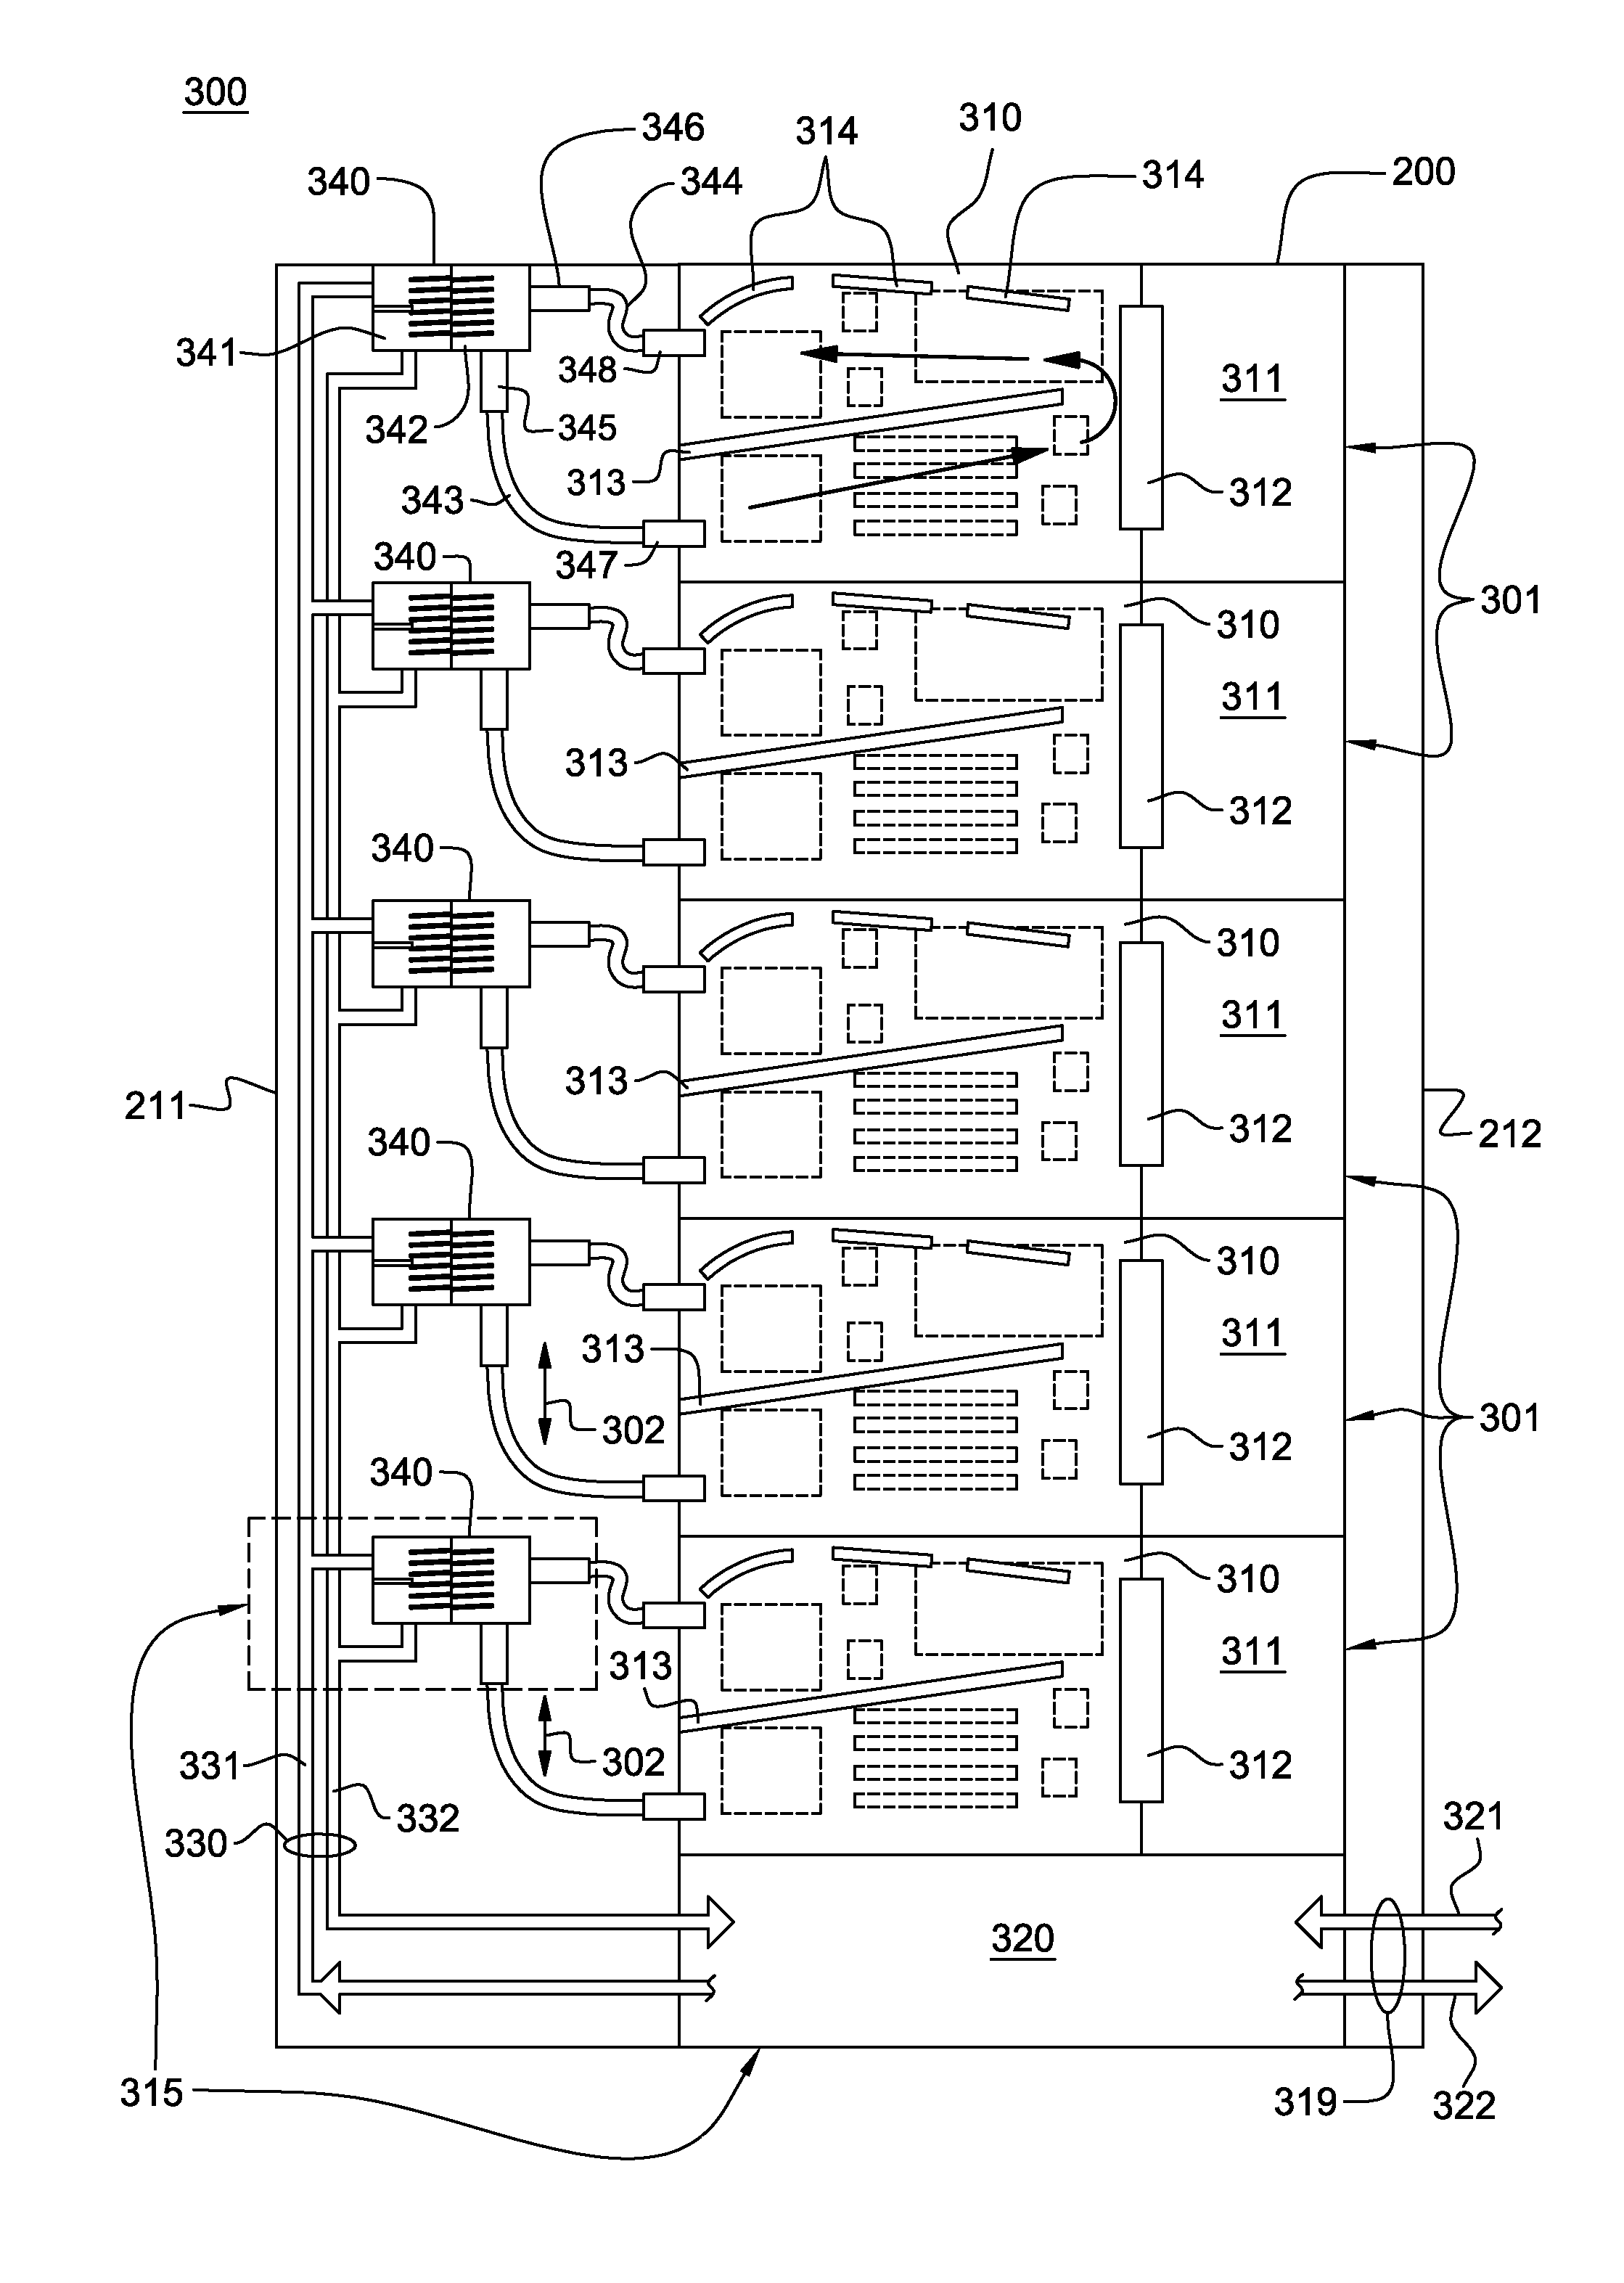 Liquid-cooled electronics rack with immersion-cooled electronic subsystems